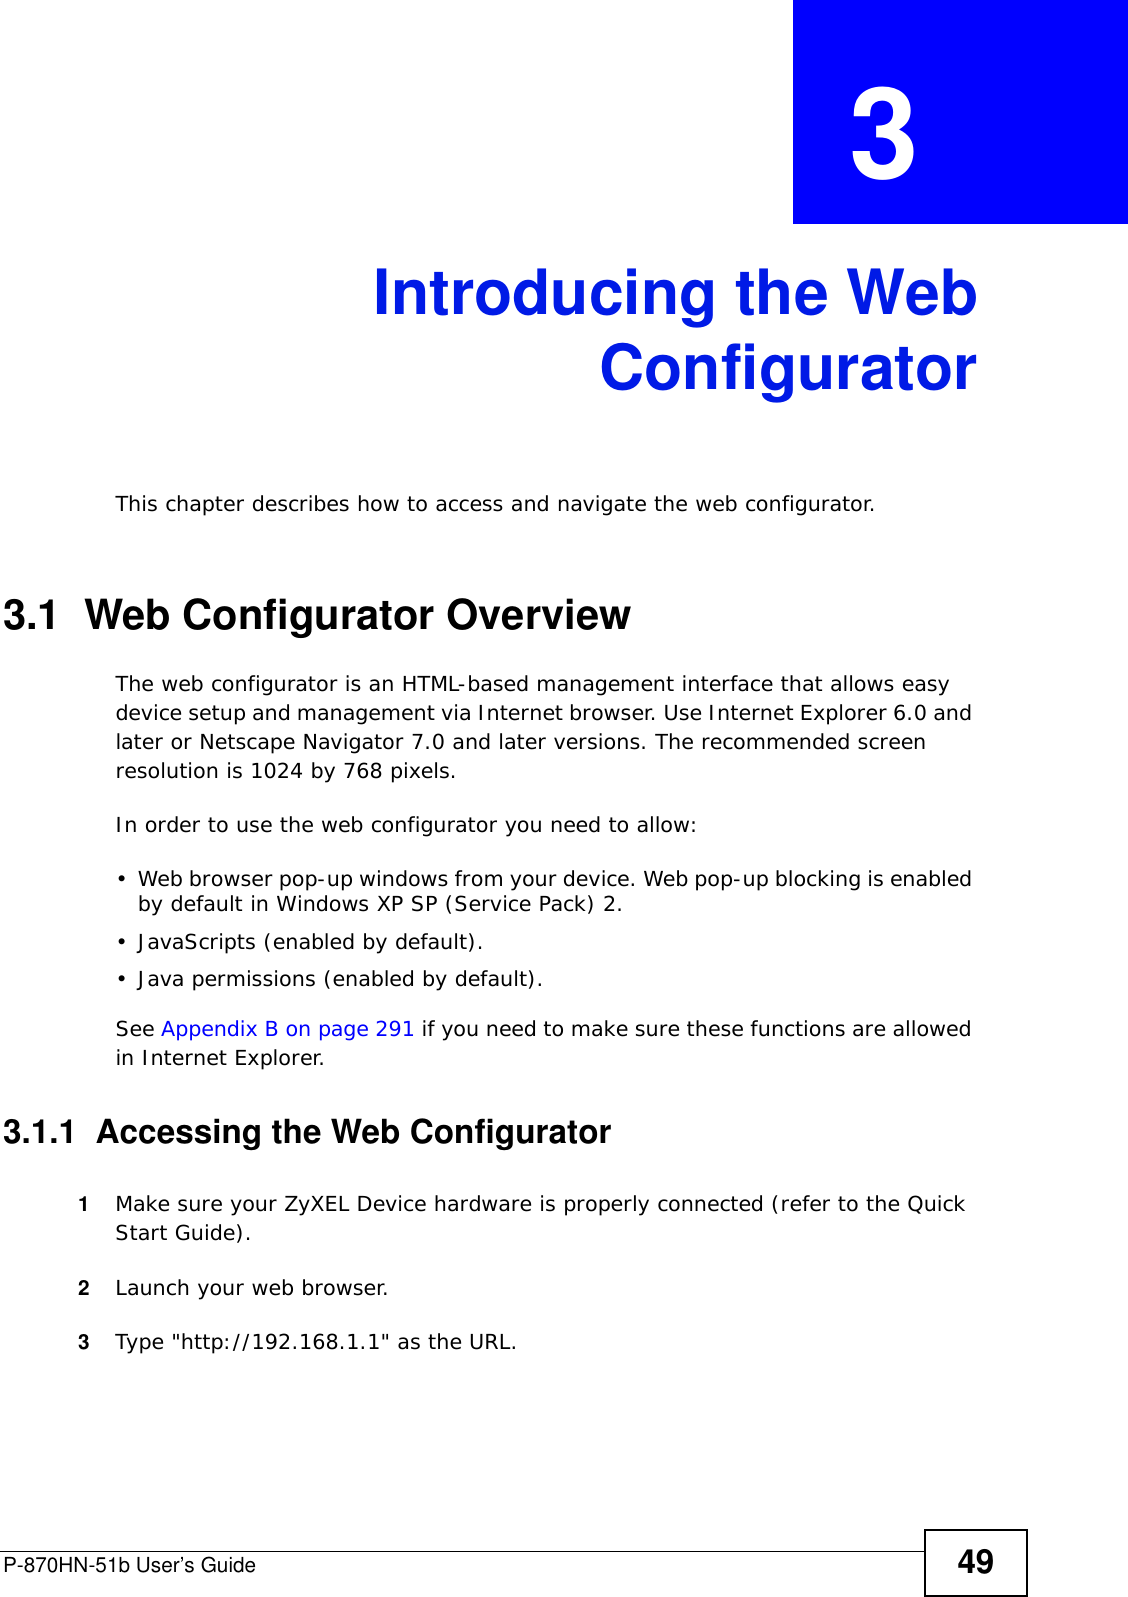 P-870HN-51b User’s Guide 49CHAPTER  3 Introducing the WebConfiguratorThis chapter describes how to access and navigate the web configurator.3.1  Web Configurator OverviewThe web configurator is an HTML-based management interface that allows easy device setup and management via Internet browser. Use Internet Explorer 6.0 and later or Netscape Navigator 7.0 and later versions. The recommended screen resolution is 1024 by 768 pixels.In order to use the web configurator you need to allow:• Web browser pop-up windows from your device. Web pop-up blocking is enabled by default in Windows XP SP (Service Pack) 2.• JavaScripts (enabled by default).• Java permissions (enabled by default).See Appendix B on page 291 if you need to make sure these functions are allowed in Internet Explorer.3.1.1  Accessing the Web Configurator1Make sure your ZyXEL Device hardware is properly connected (refer to the Quick Start Guide).2Launch your web browser.3Type &quot;http://192.168.1.1&quot; as the URL.